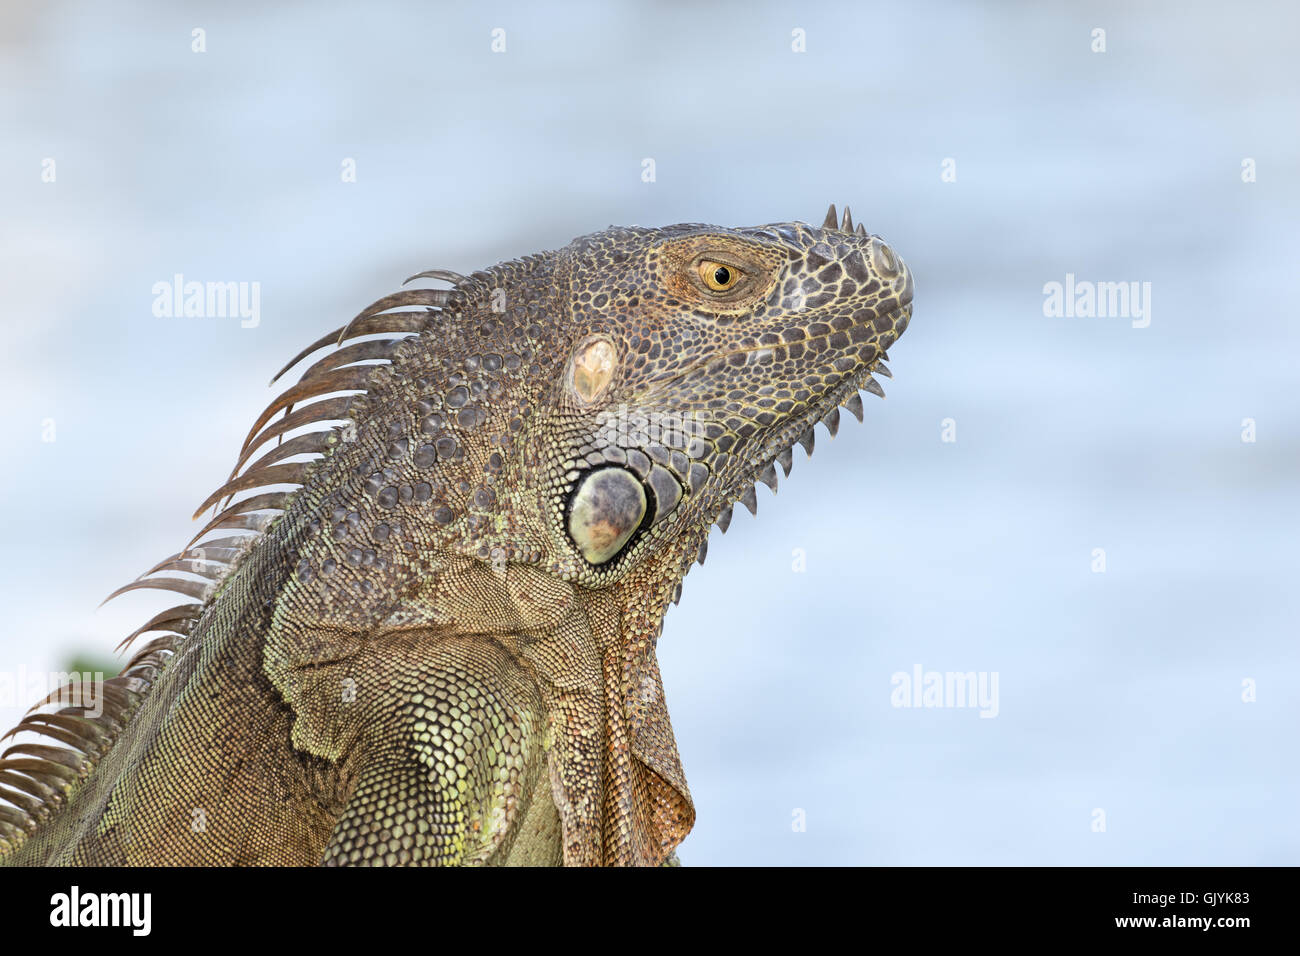 Portrait of a Green Iguana in the morning sun in South Florida Stock Photo